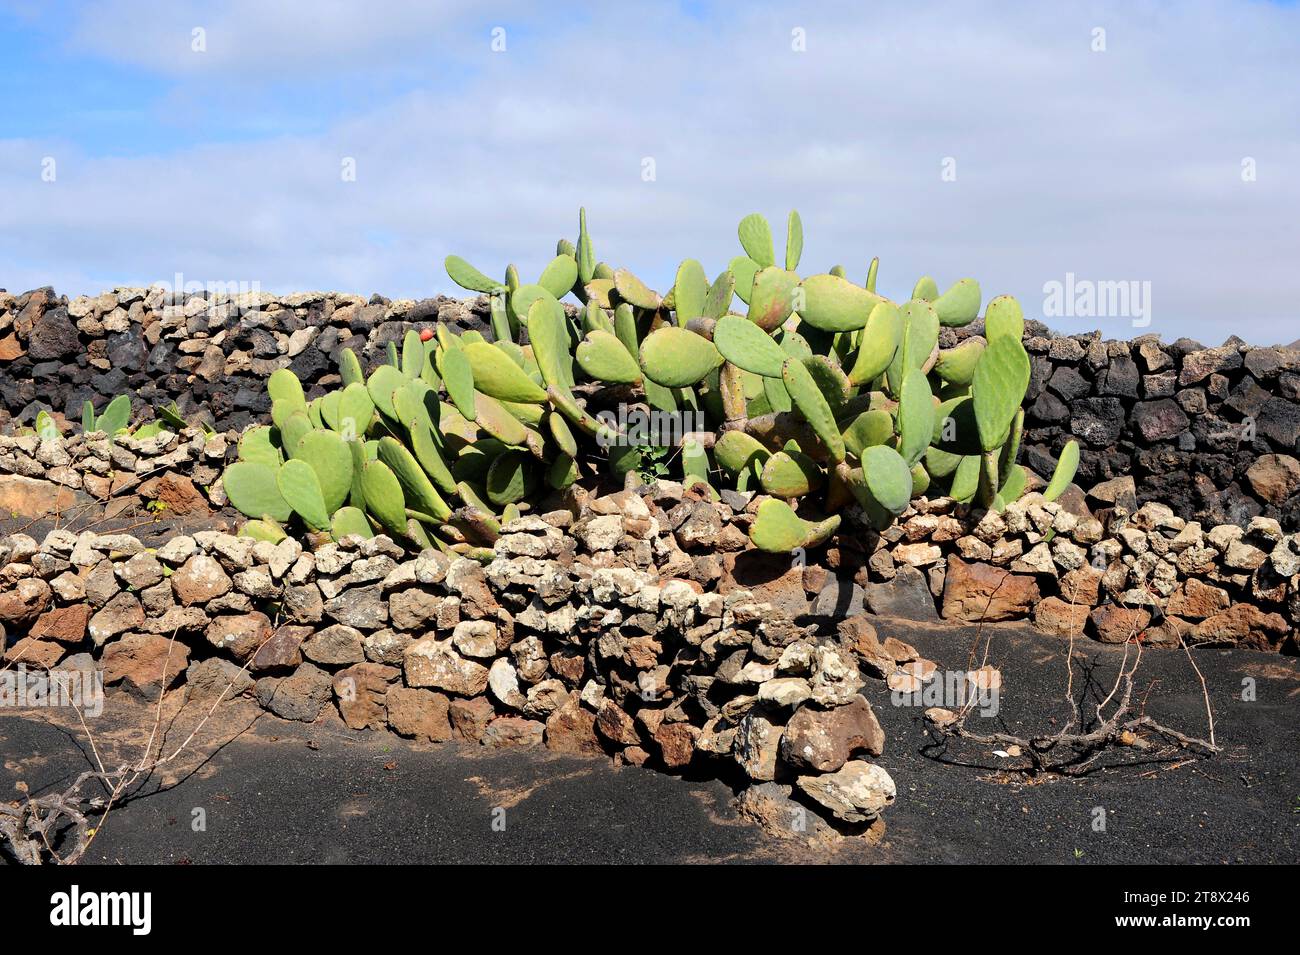 Barbary fig or Indian fig opuntia (Opuntia ficus-indica) is a cactus native to Mexico but naturalized in many arid or semiarid region of the World. Th Stock Photo